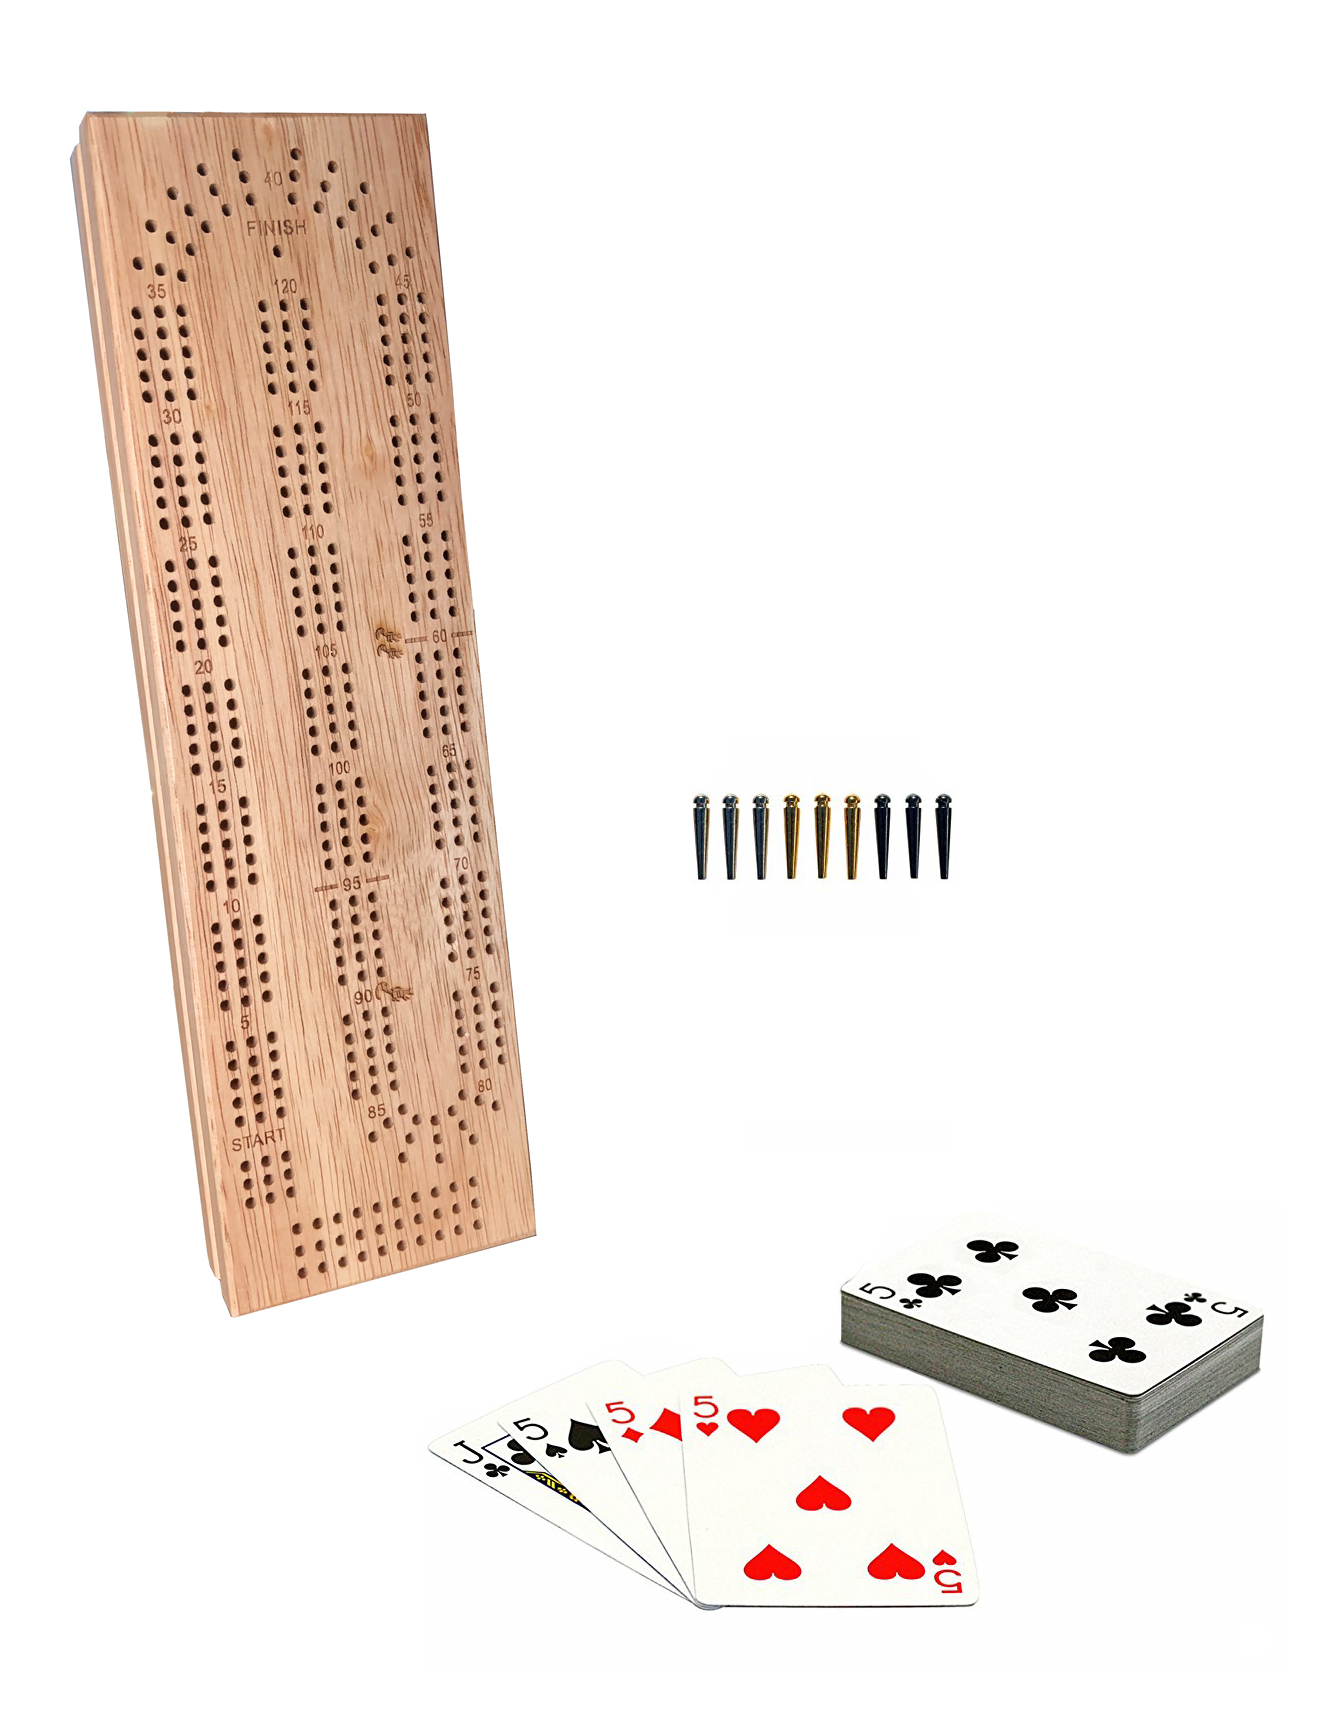 SOLID WOOD CONTINUOUS 3 TRACK BOARD W// PEGS CLASSIC CRIBBAGE SET